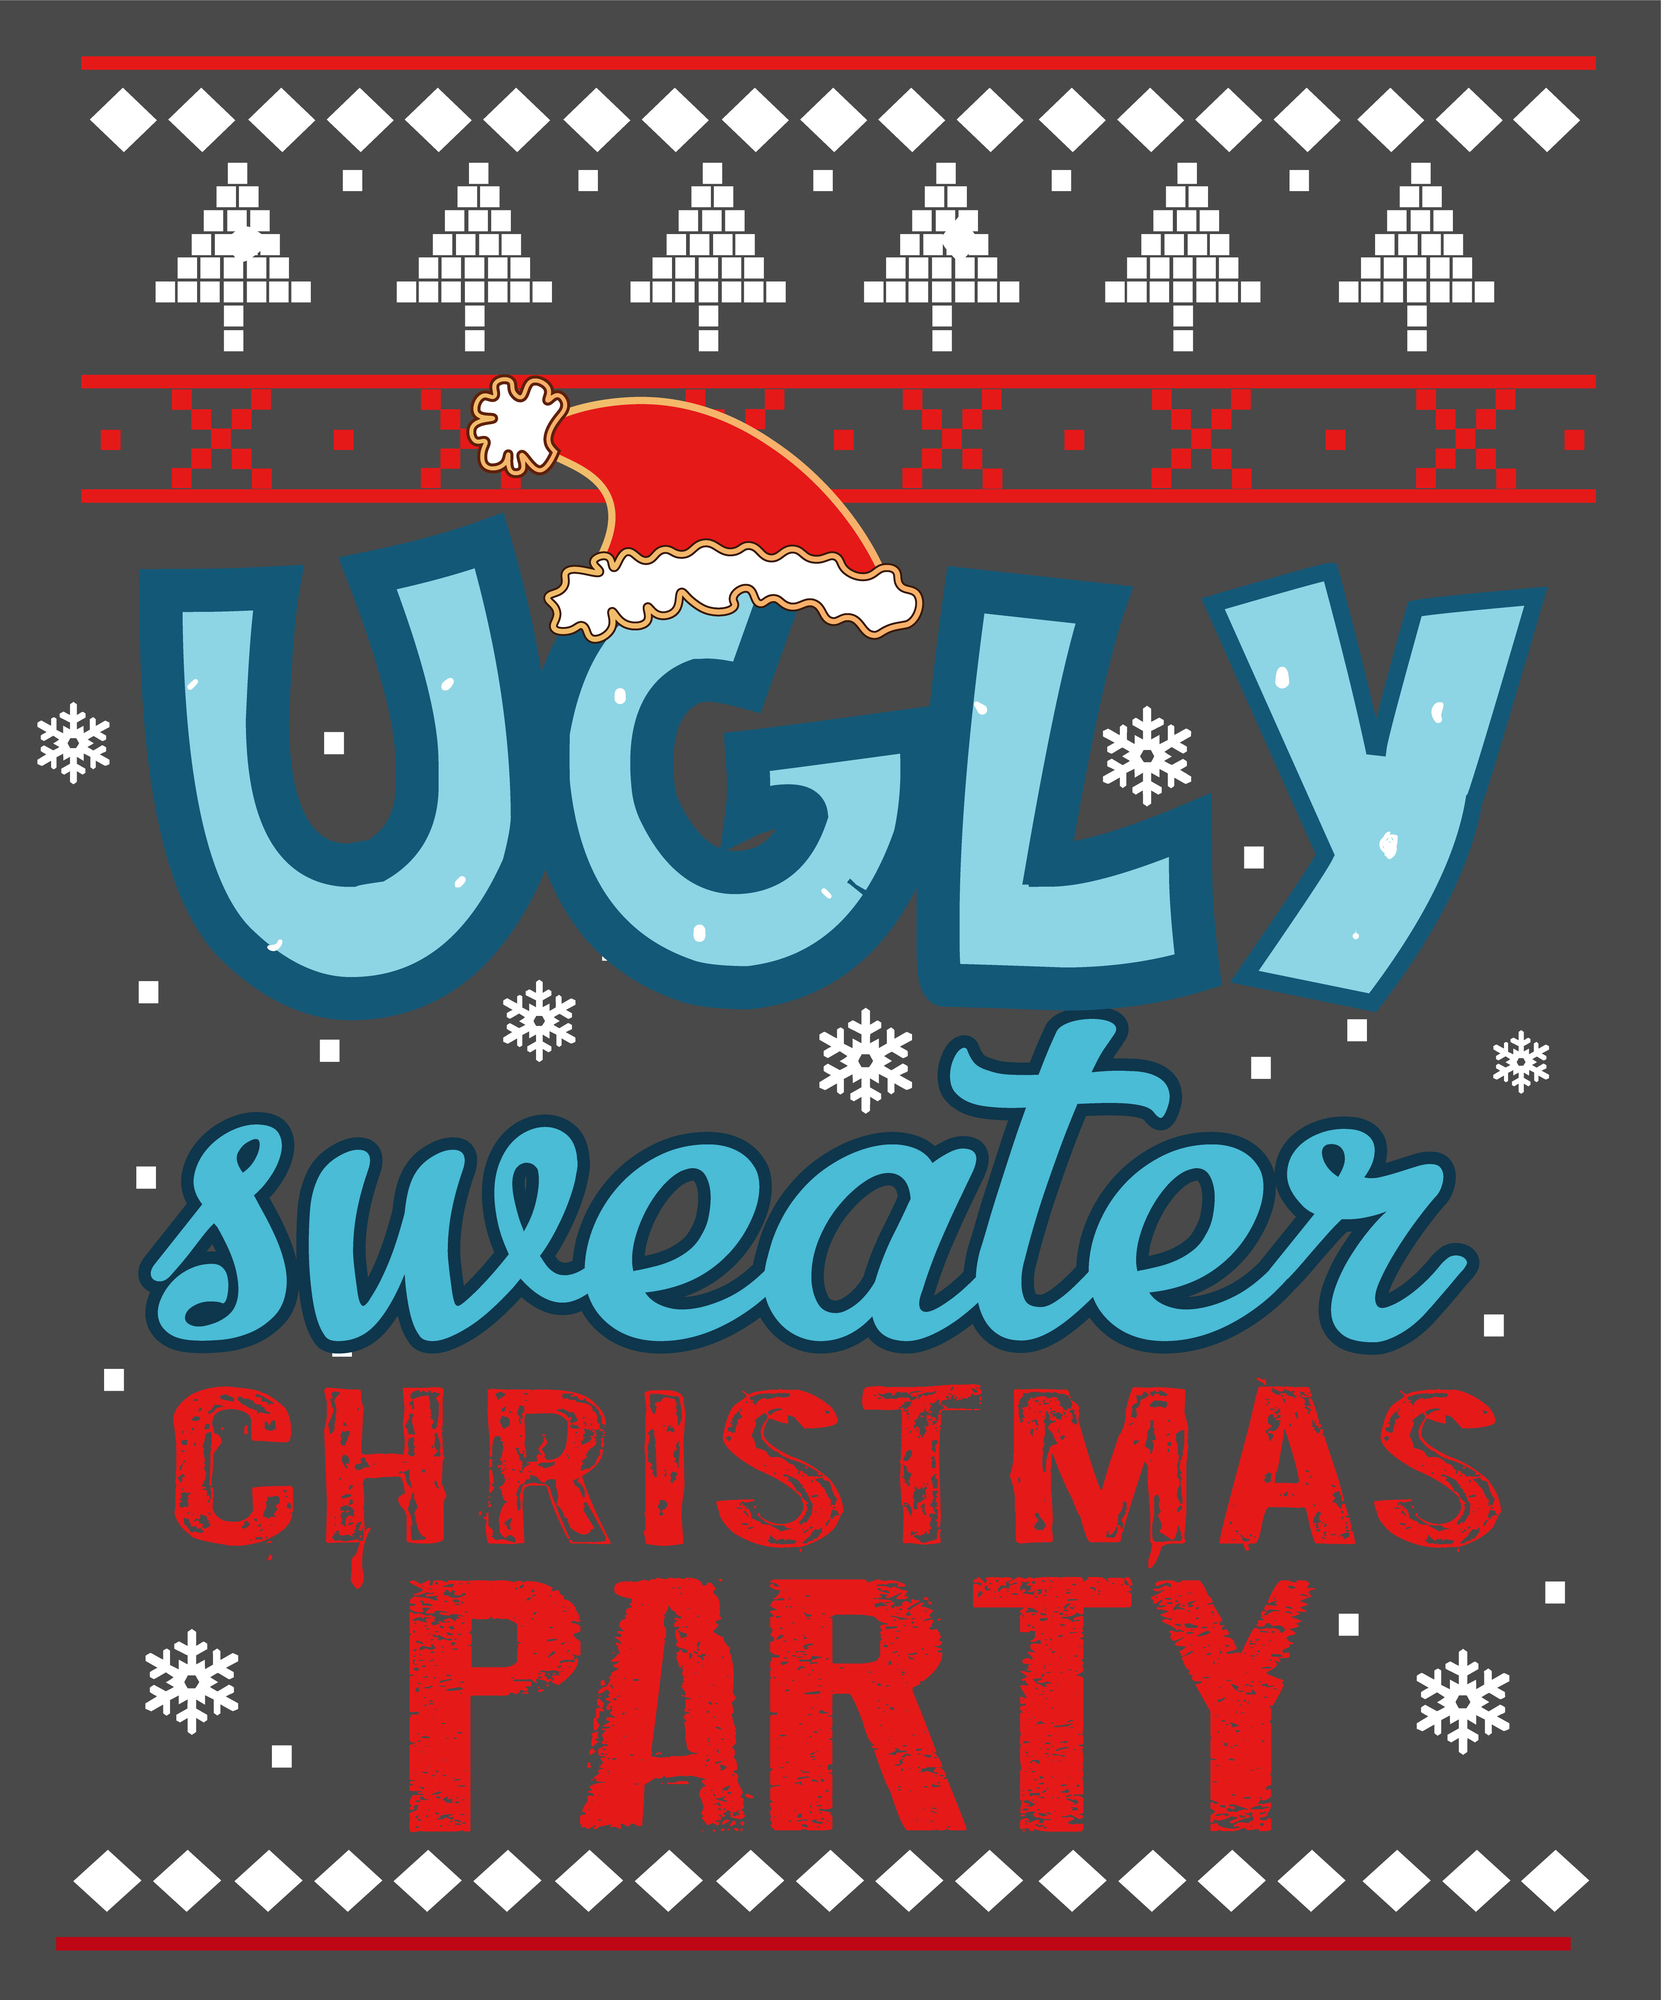 Ugly sweater Christmas party and bar crawl.